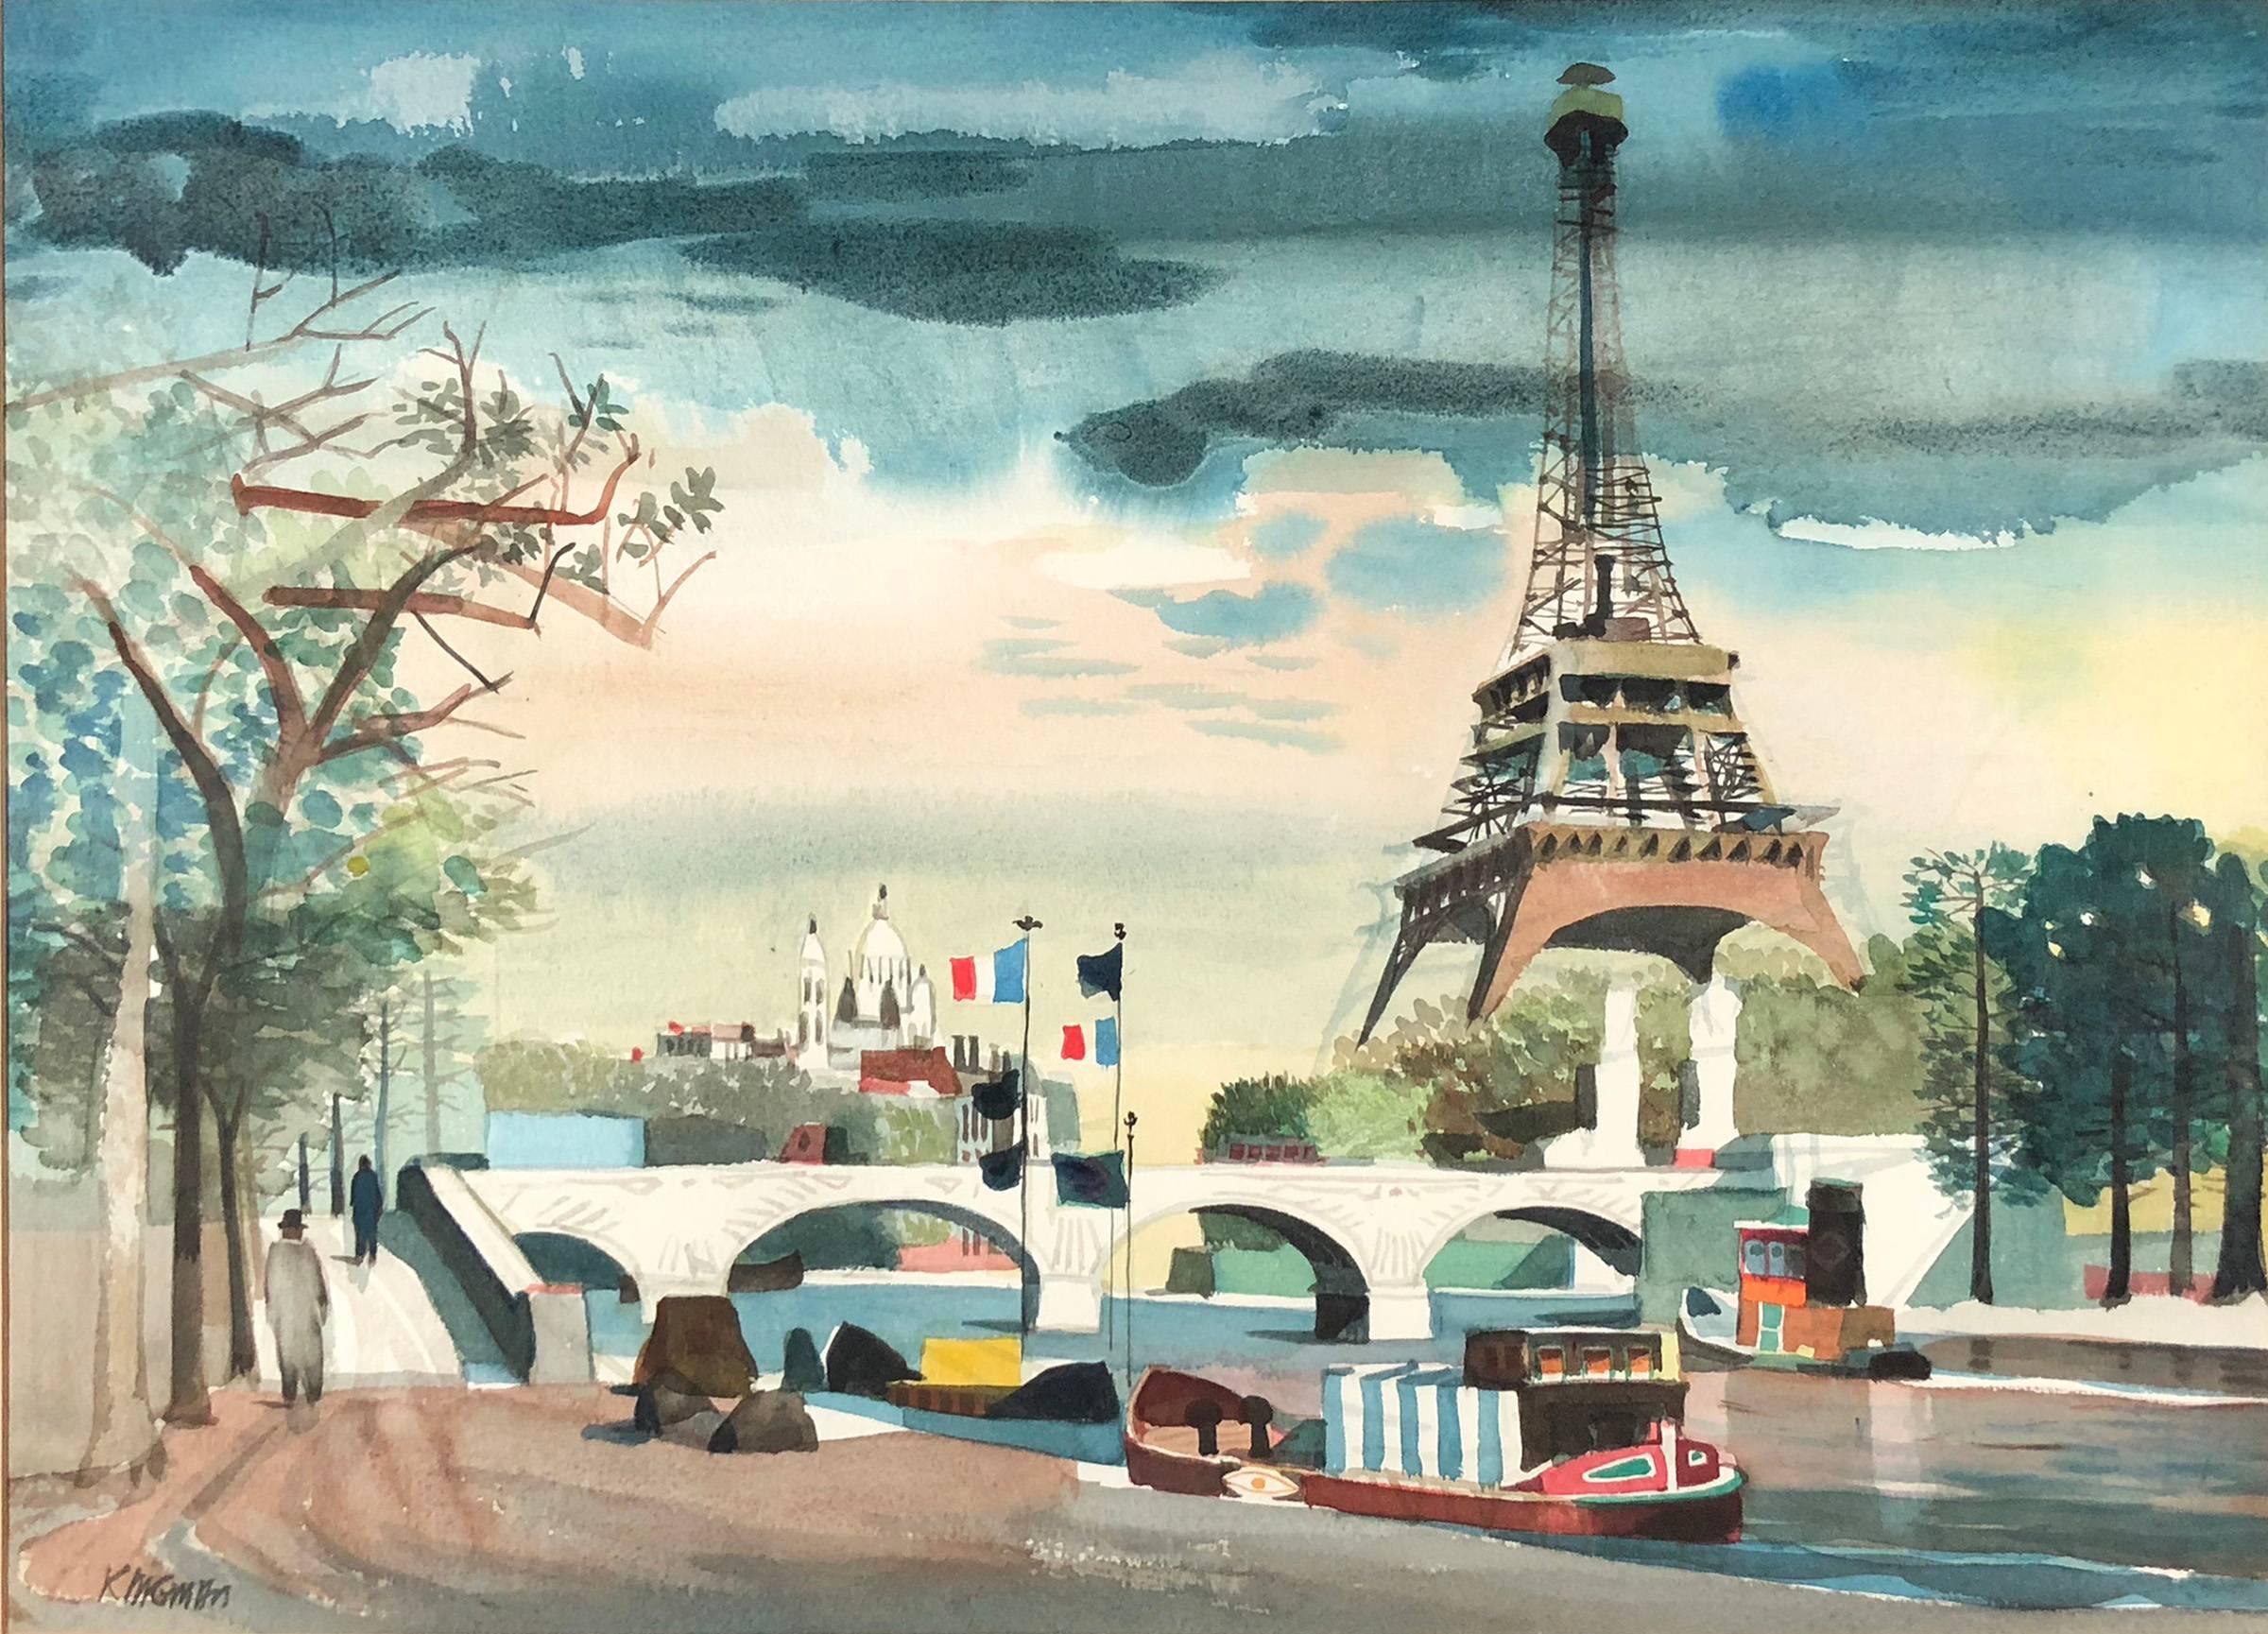 Dong Kingman Landscape Art - Paris and the Eiffel Tower (The City of Love)